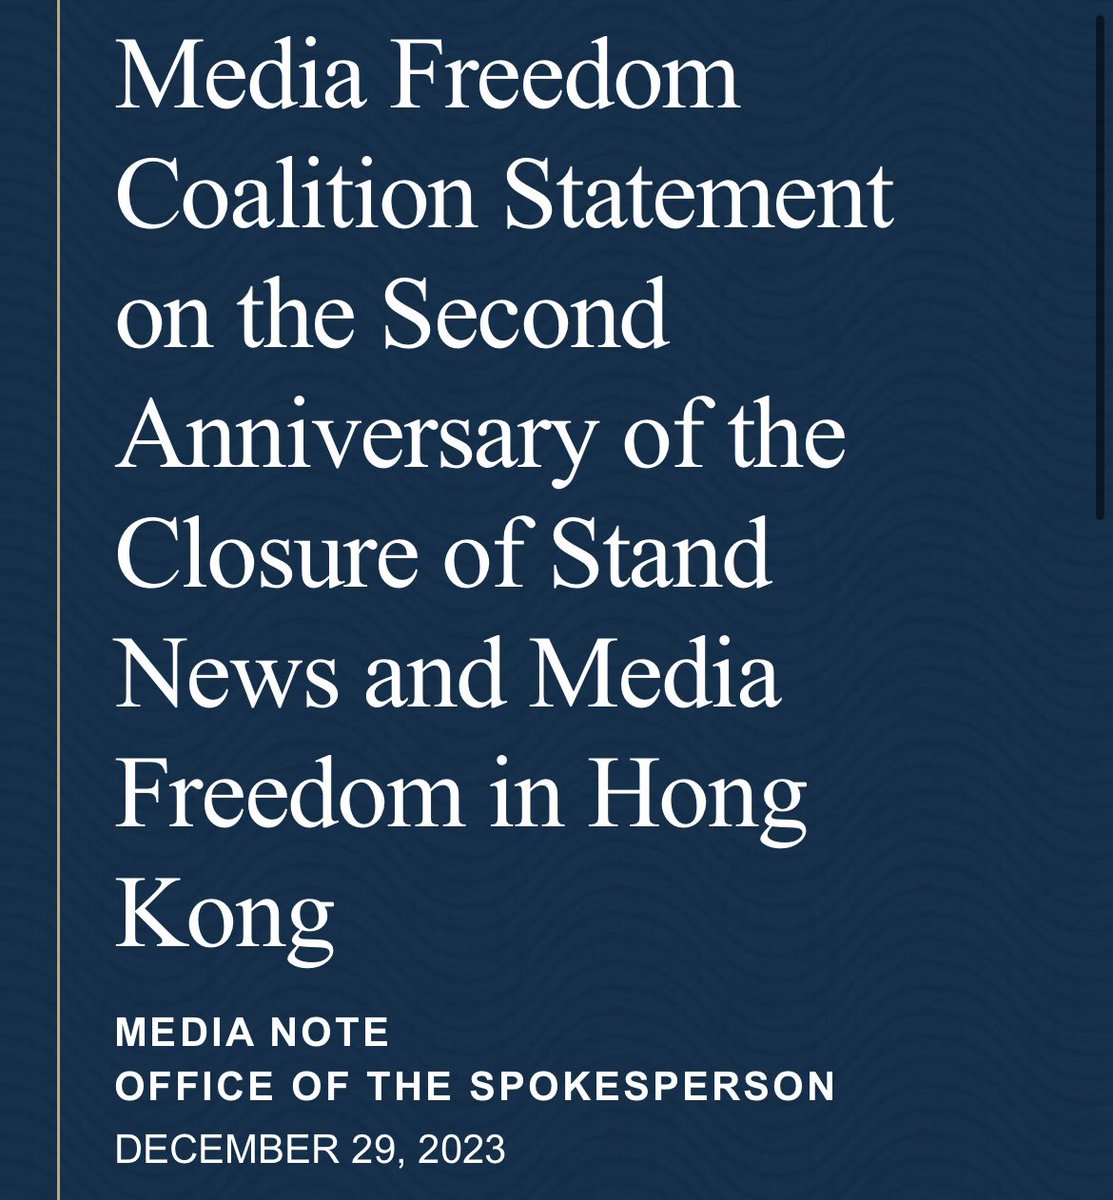 24 countries jointly issue a statement to express deep concerns for the media freedom in Hong Kong on the 2nd anniversary of the closure of #StandNews.

“The free flow and exchange of opinions and information is vital to Hong Kong’s people, business and international reputation.”